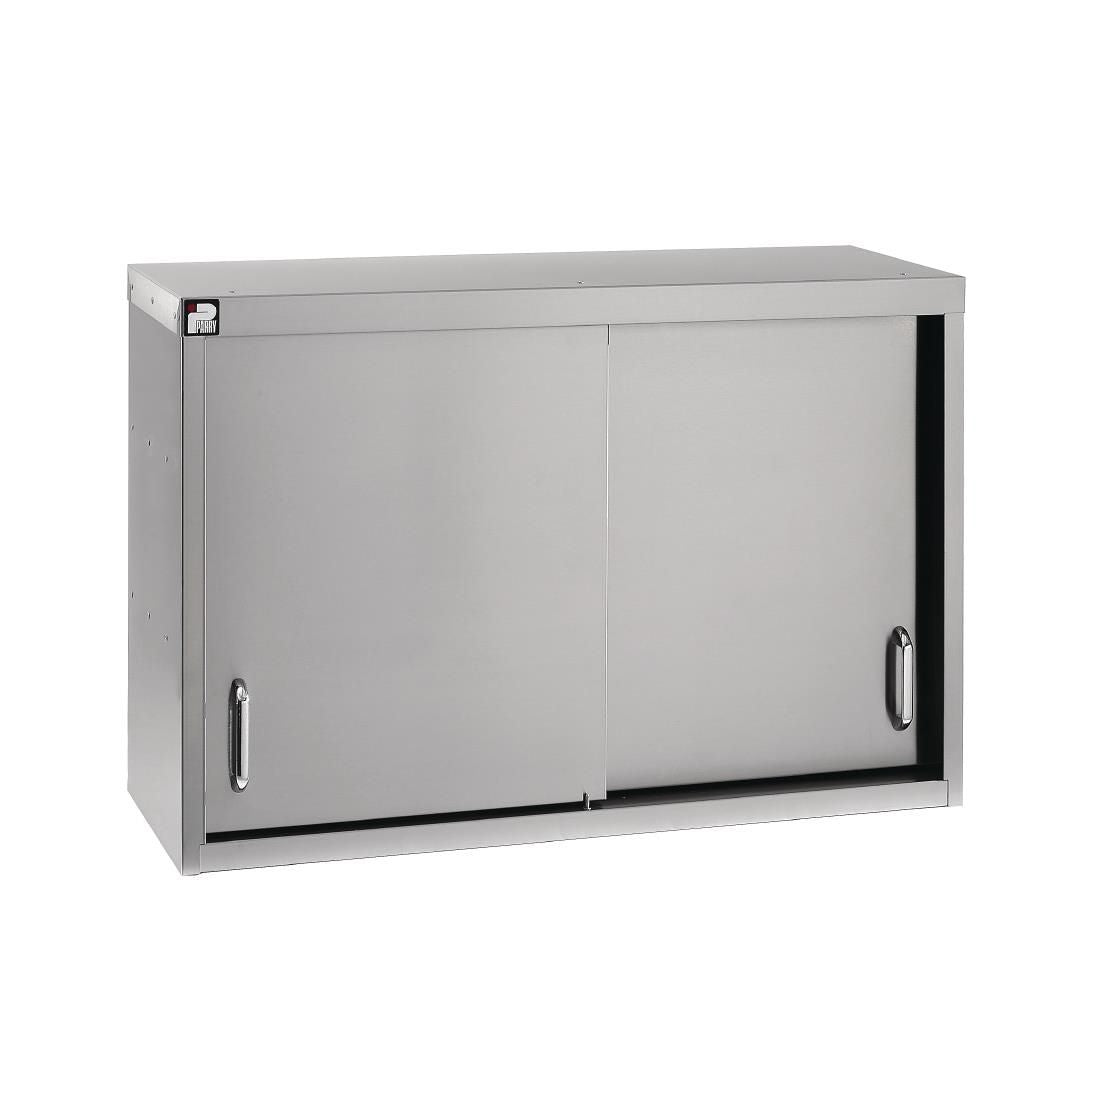 GM762 Parry Stainless Steel Sliding Door Wall Cupboard 1500mm JD Catering Equipment Solutions Ltd